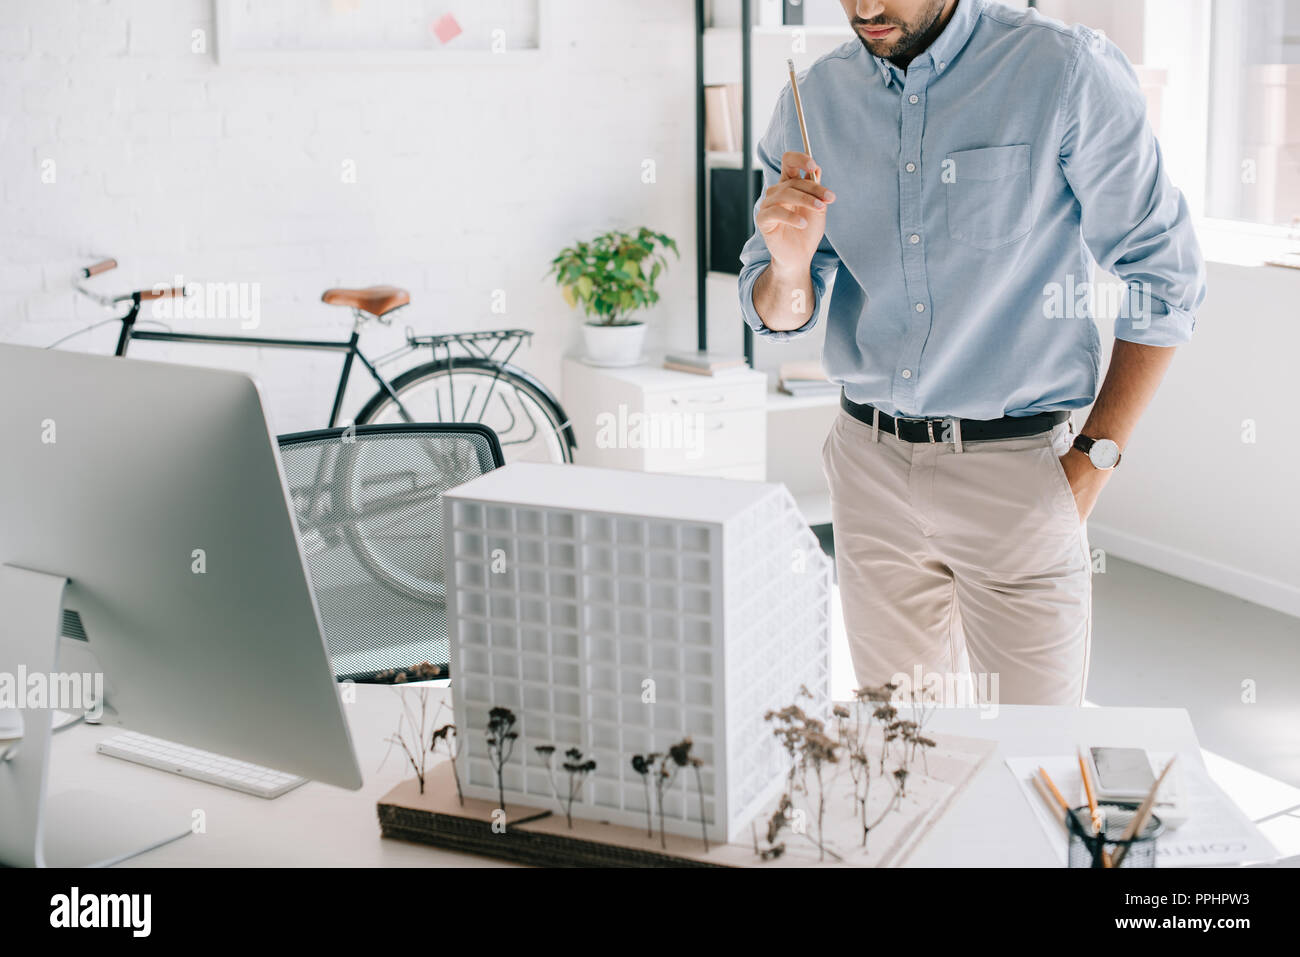 cropped image of architect holding pencil and standing near architecture model on table in office Stock Photo